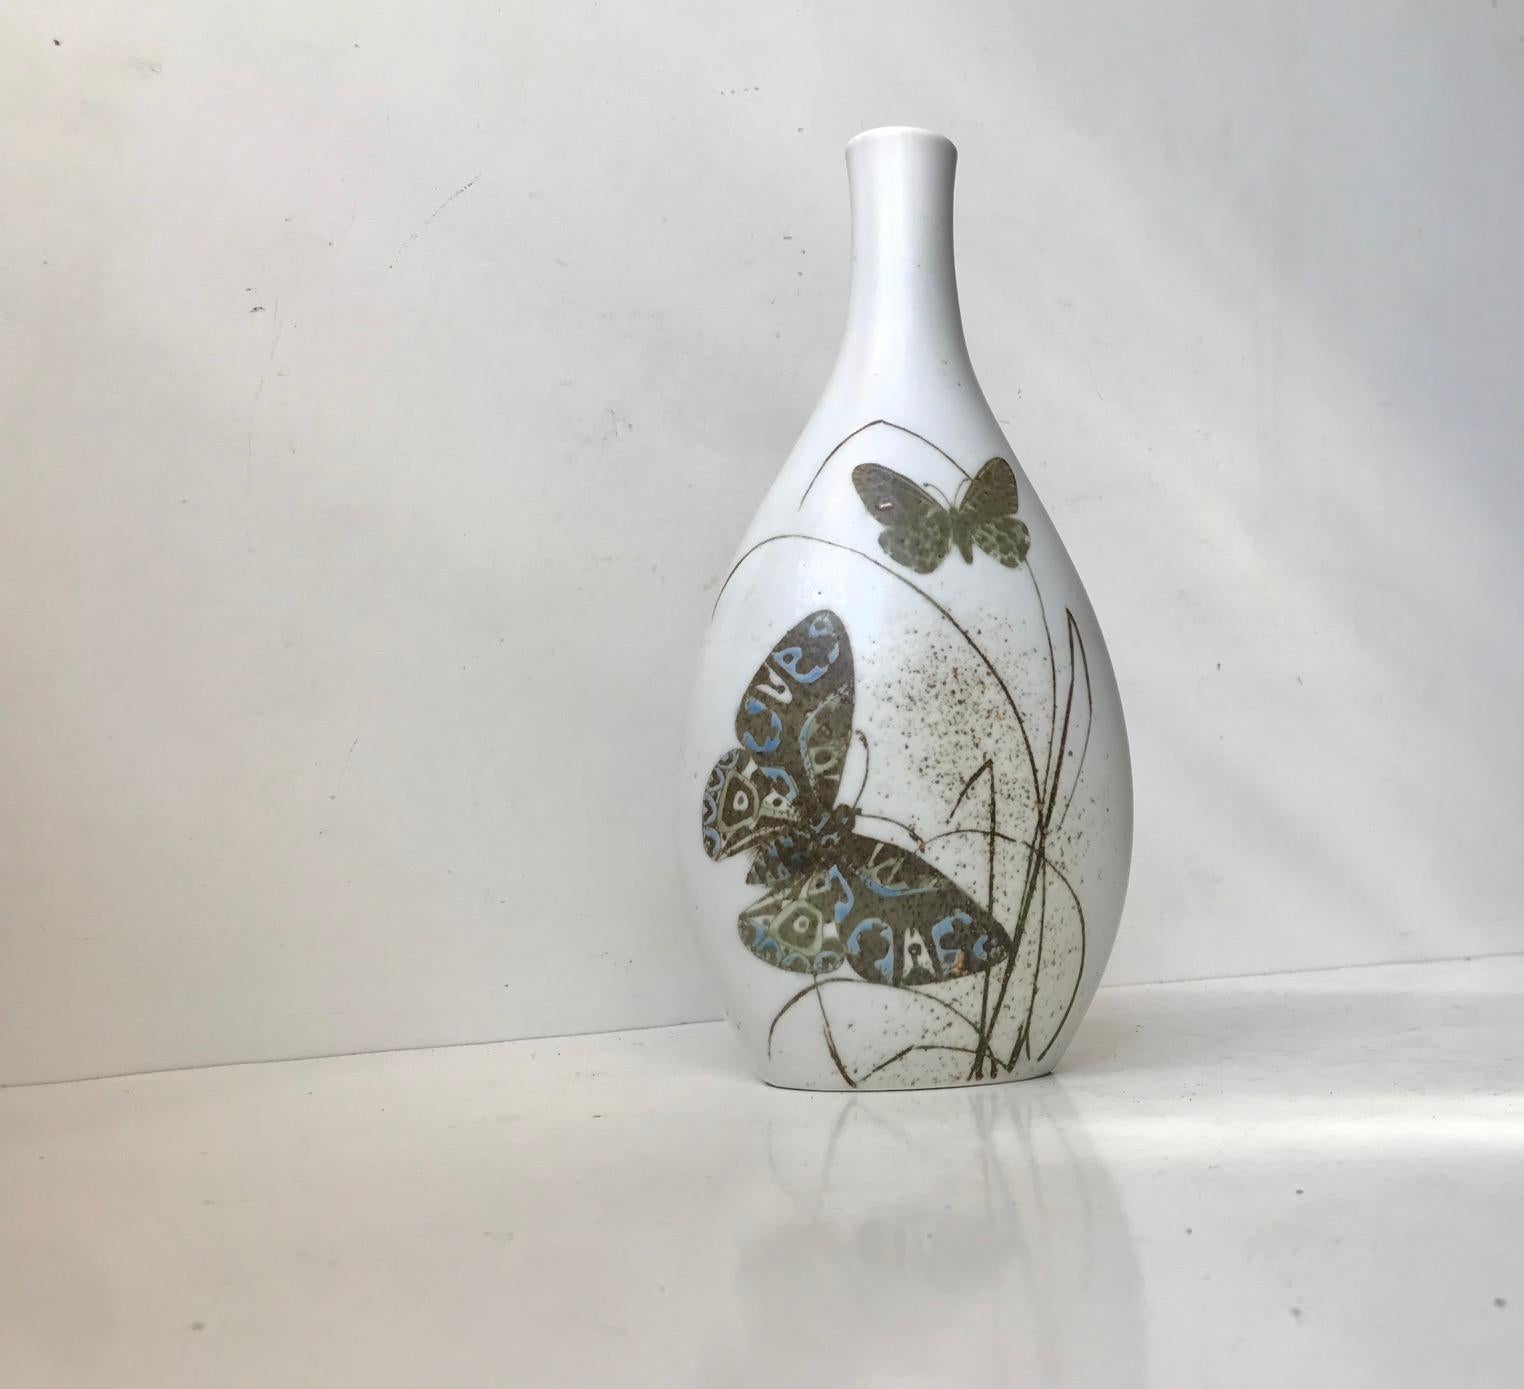 Large Royal Copenhagen ceramic Vase designed by Nils Thorsson. Decorated in earthy glazes with butterflies and flowers. Model number 1044/5141 and its fully marked to the base with designer initials and makers mark. Measurements: H: 24, D: 13 cm.